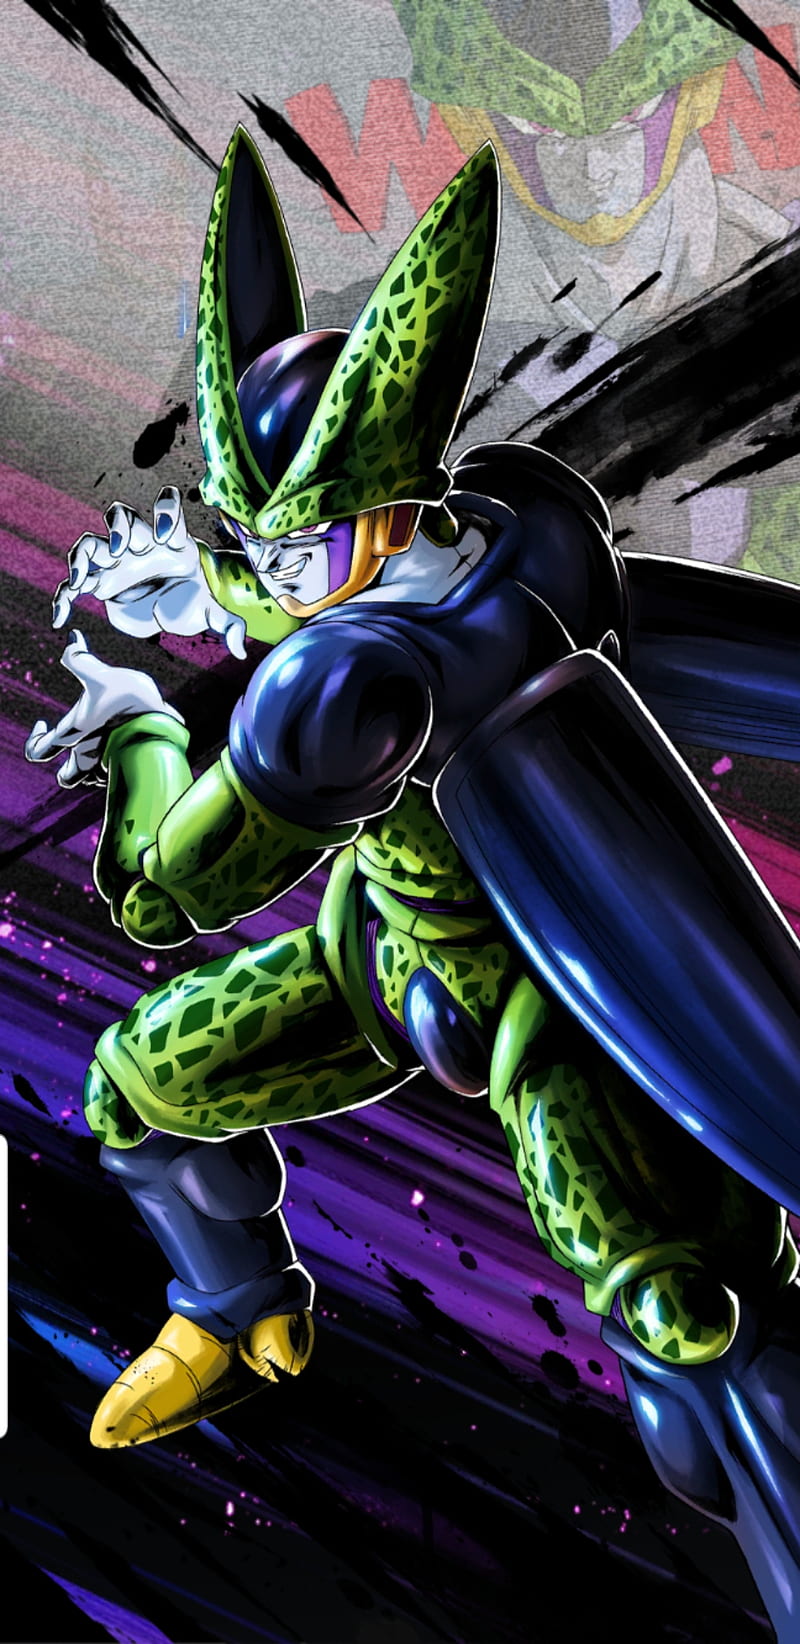 Download Perfect Cell, the perfect warrior from Dragon Ball